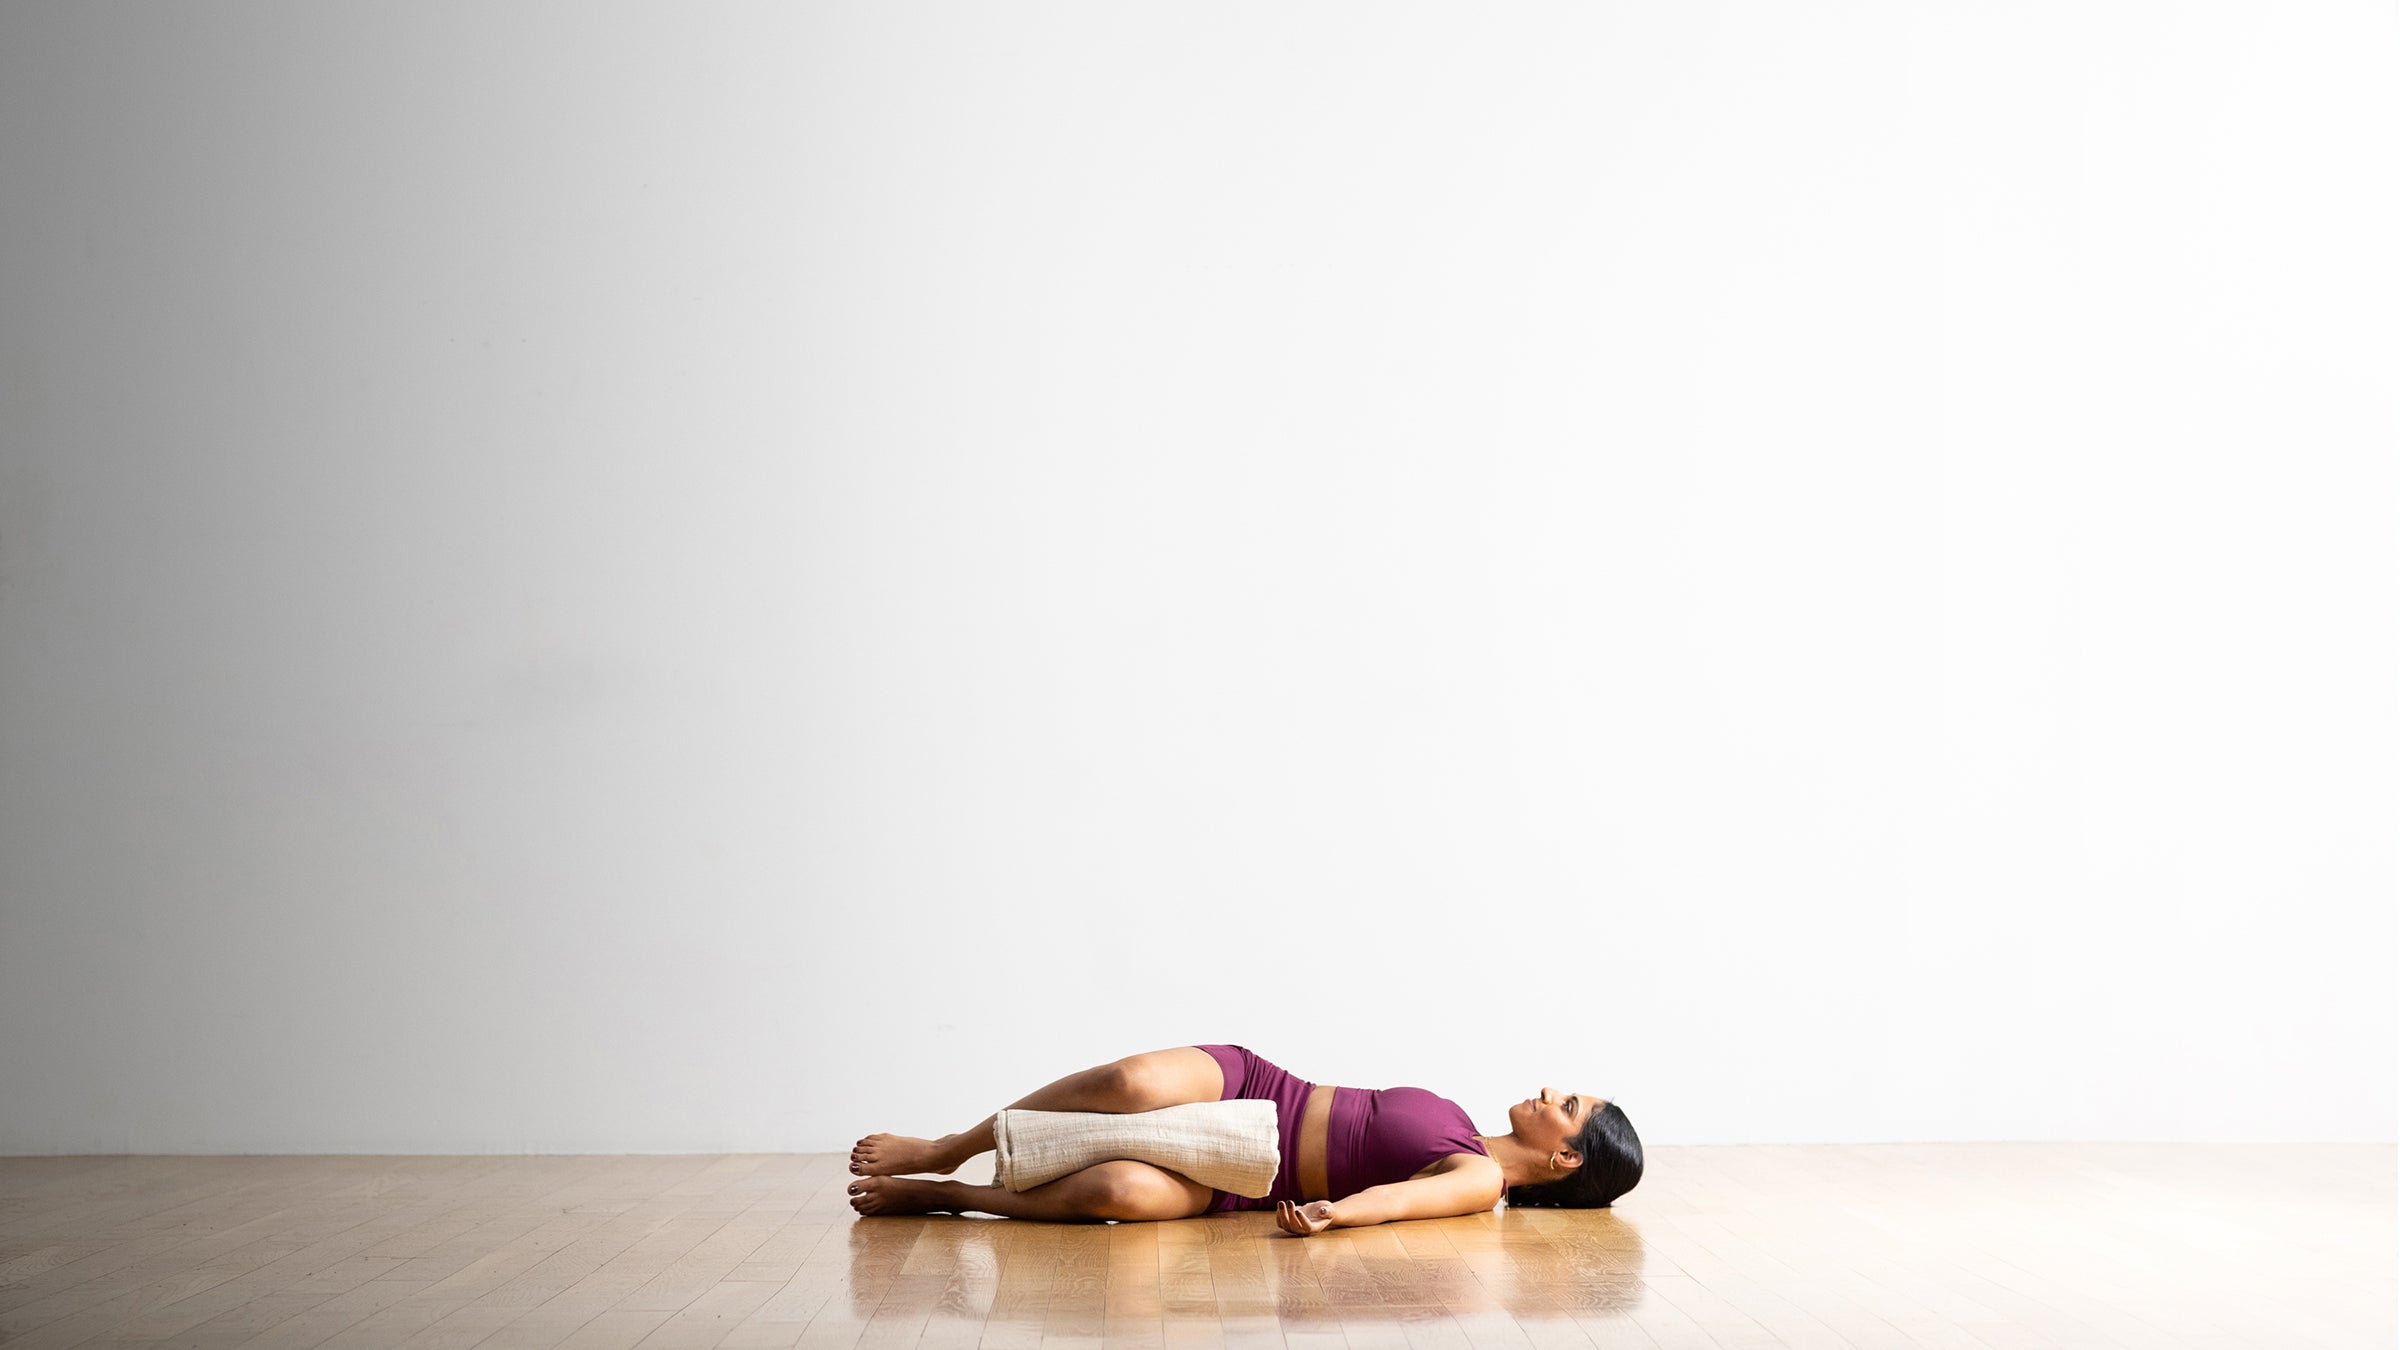 Relieve Menstrual Cramps Naturally: Best Yoga Poses for Women's Health